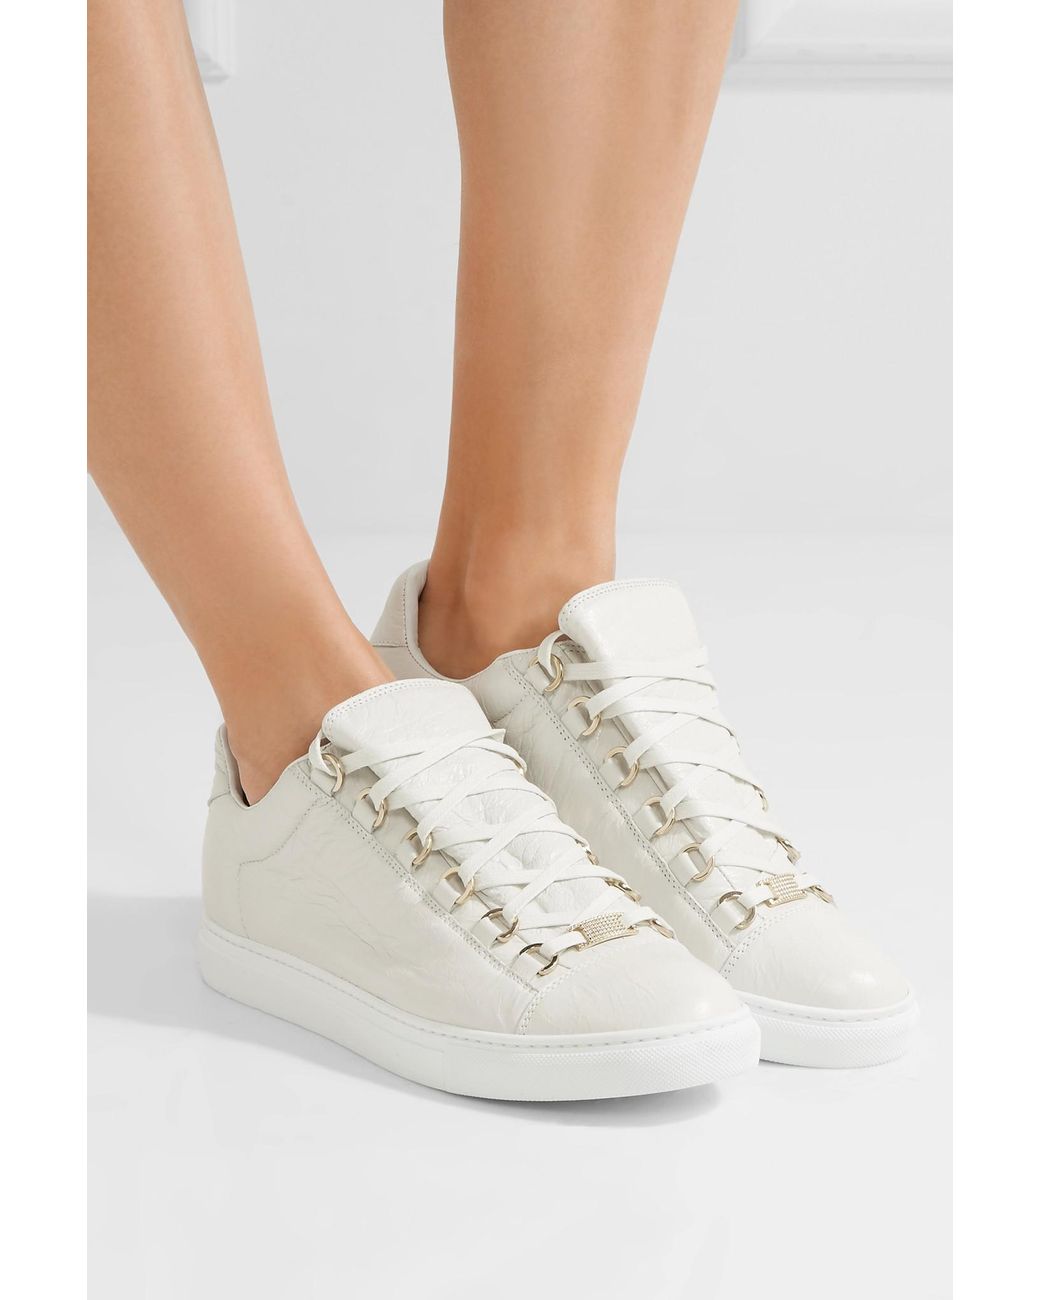 Link blur Kro Balenciaga Arena Crinkled-leather Sneakers in White | Lyst